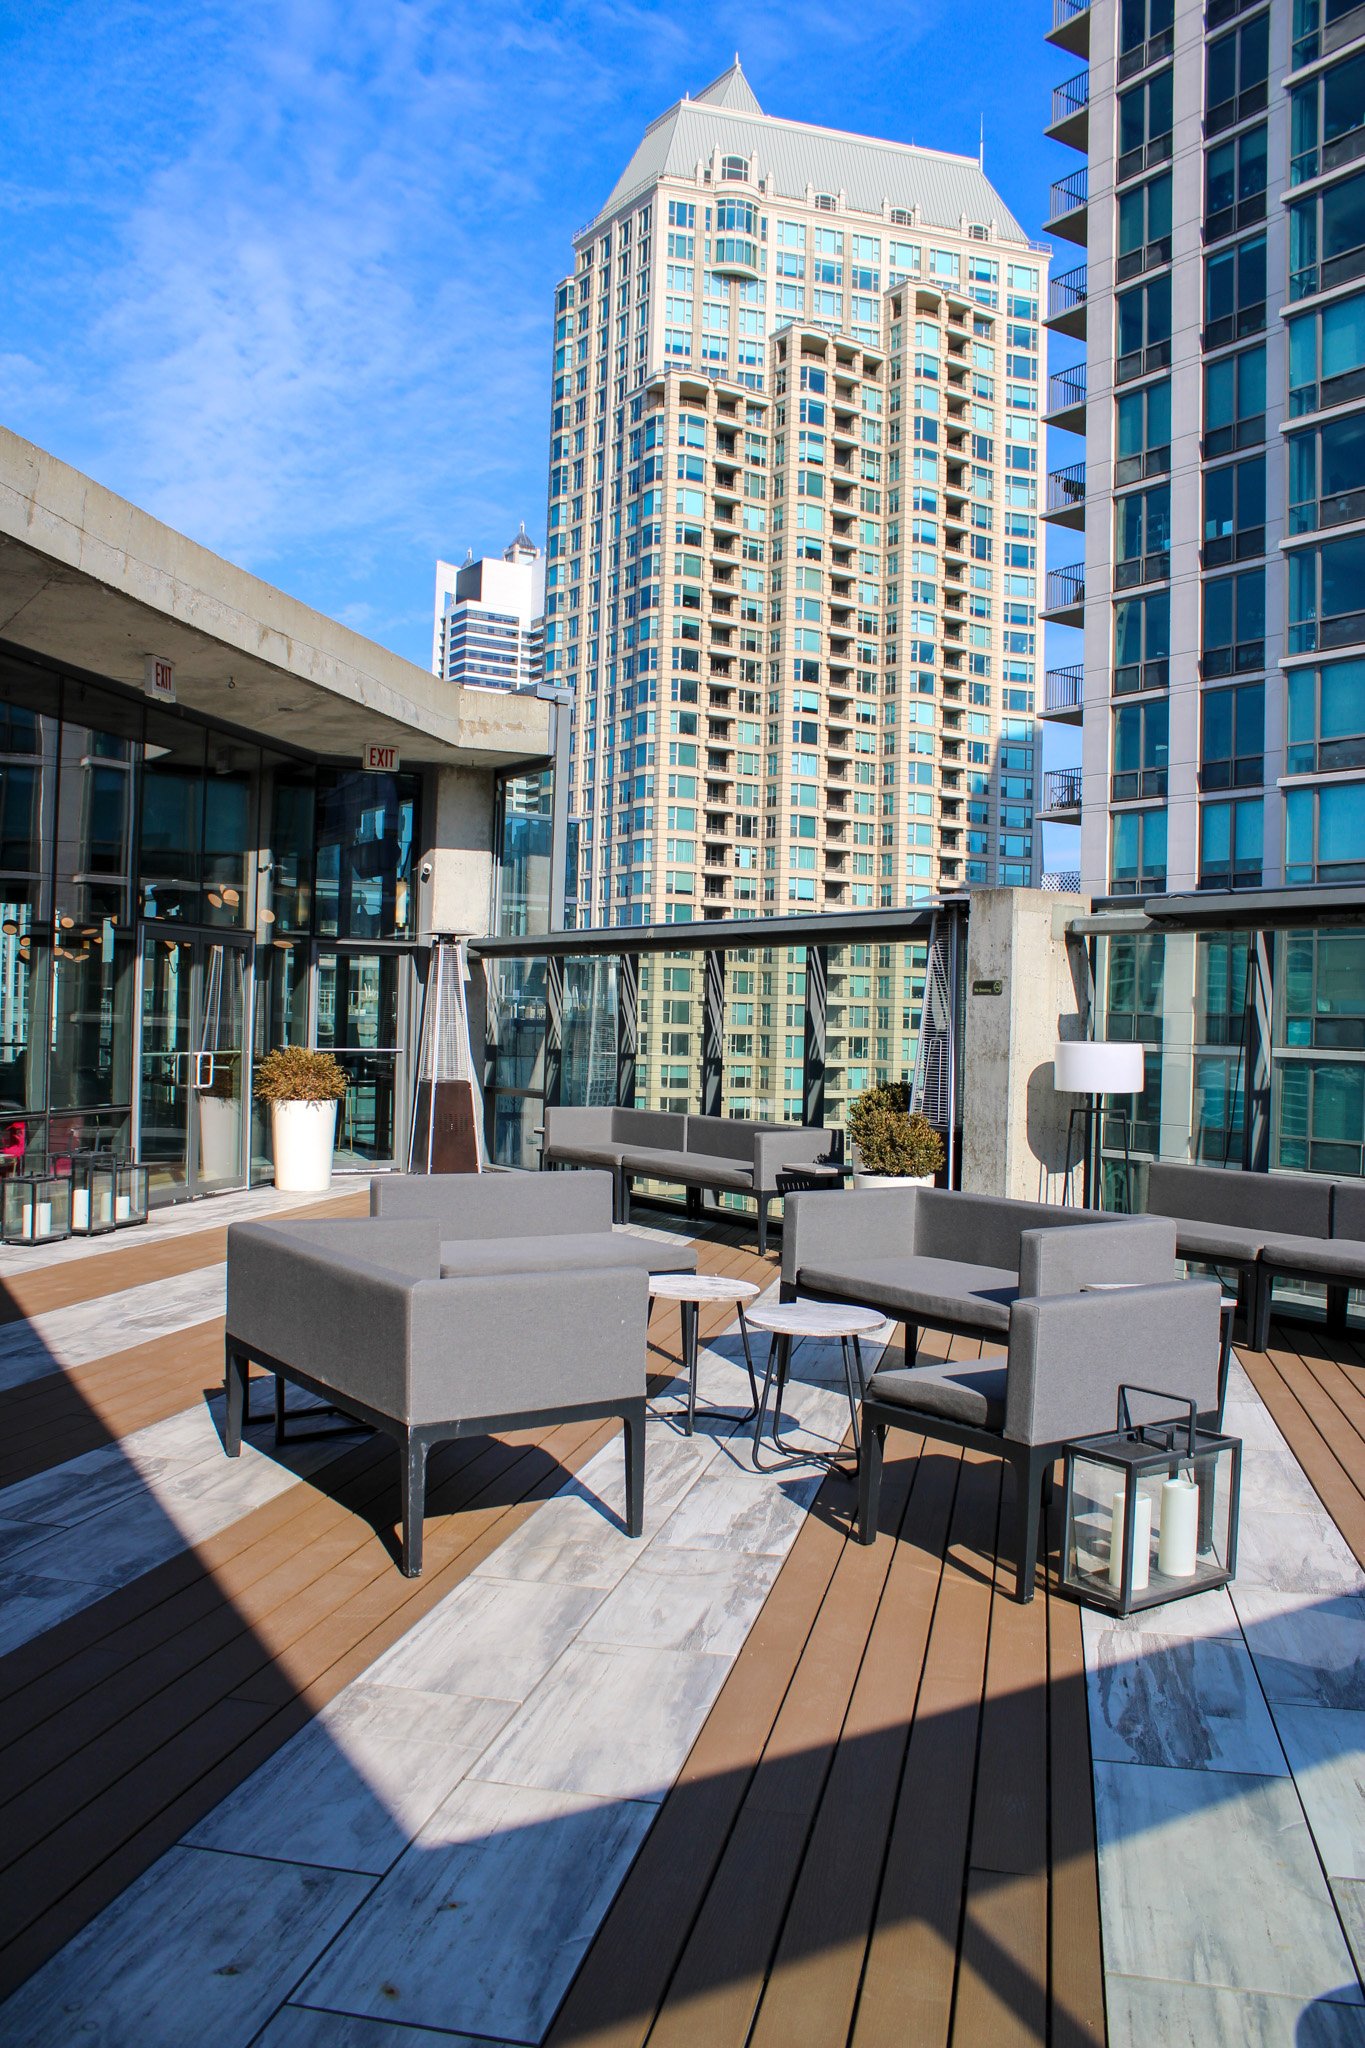 Spring rooftop days are upon us 😎☀️ Host your celebration on the Twenty-Six rooftop and soak up the warm Chicago sunshine with a drink in hand 🥂
.
.
.
#twentysixchicago #eventvenue #chicagoevents #chicagorooftop #rooftopwedding #rooftopbar #chicago